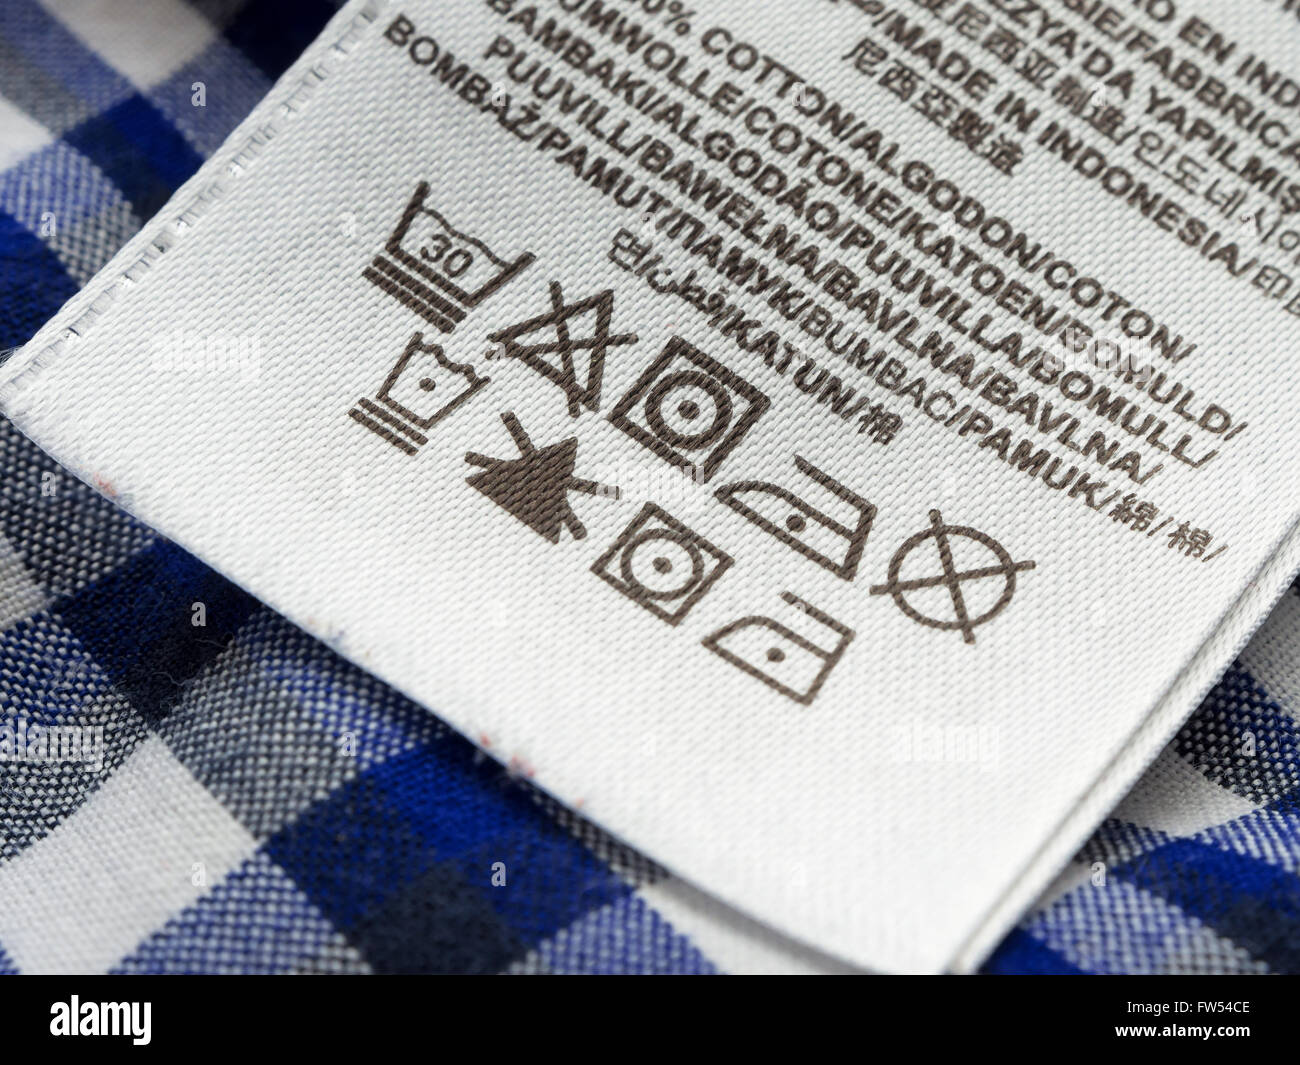 Everything You Need To Know About The Clothing Label in 2021